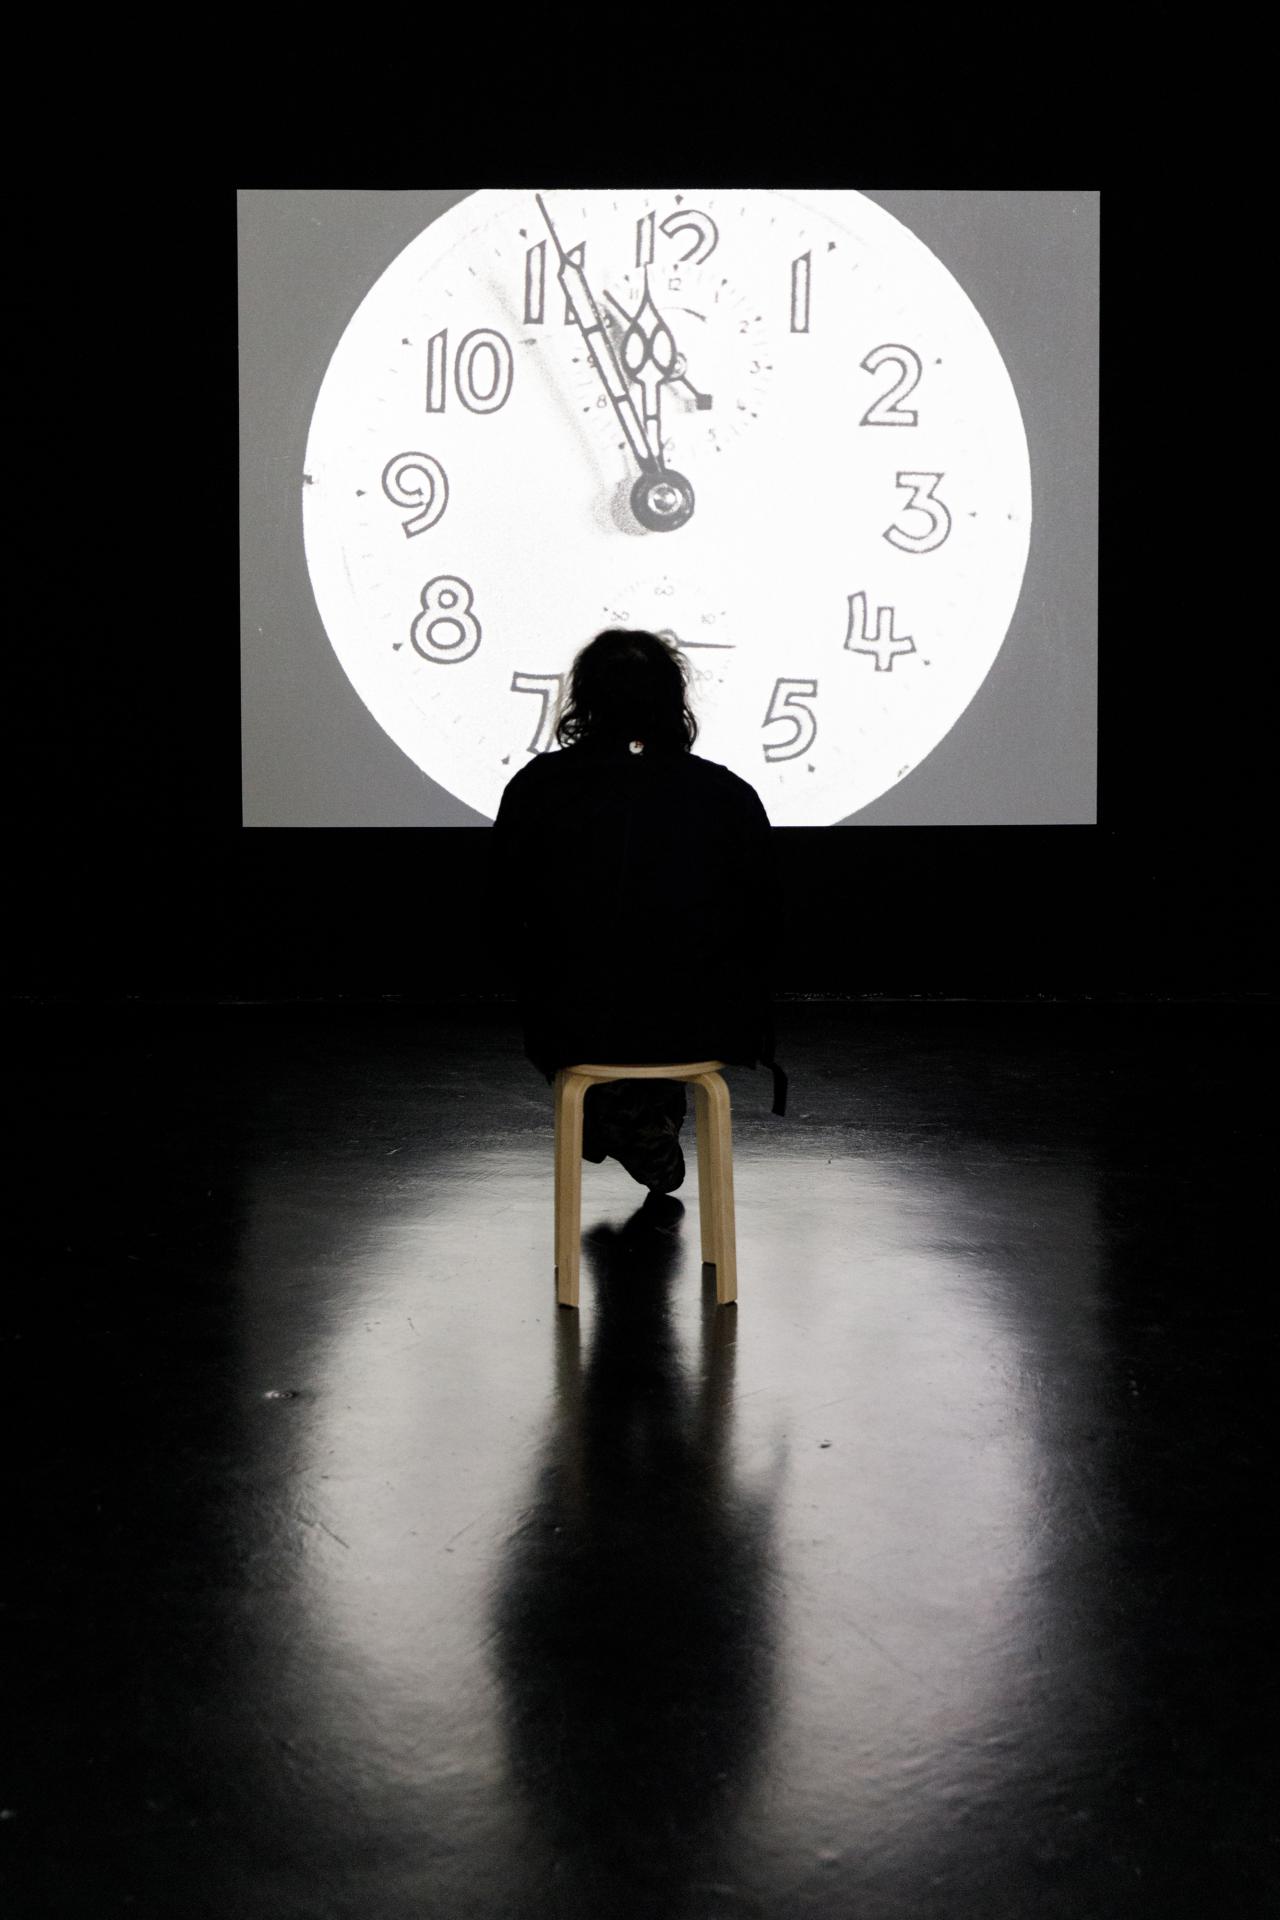 The photo shows the silhouette of a person watching a black and white film on a large screen. On the screen, an analogue clock strikes twelve. The light of the screen falls a round blurred light on the floor.